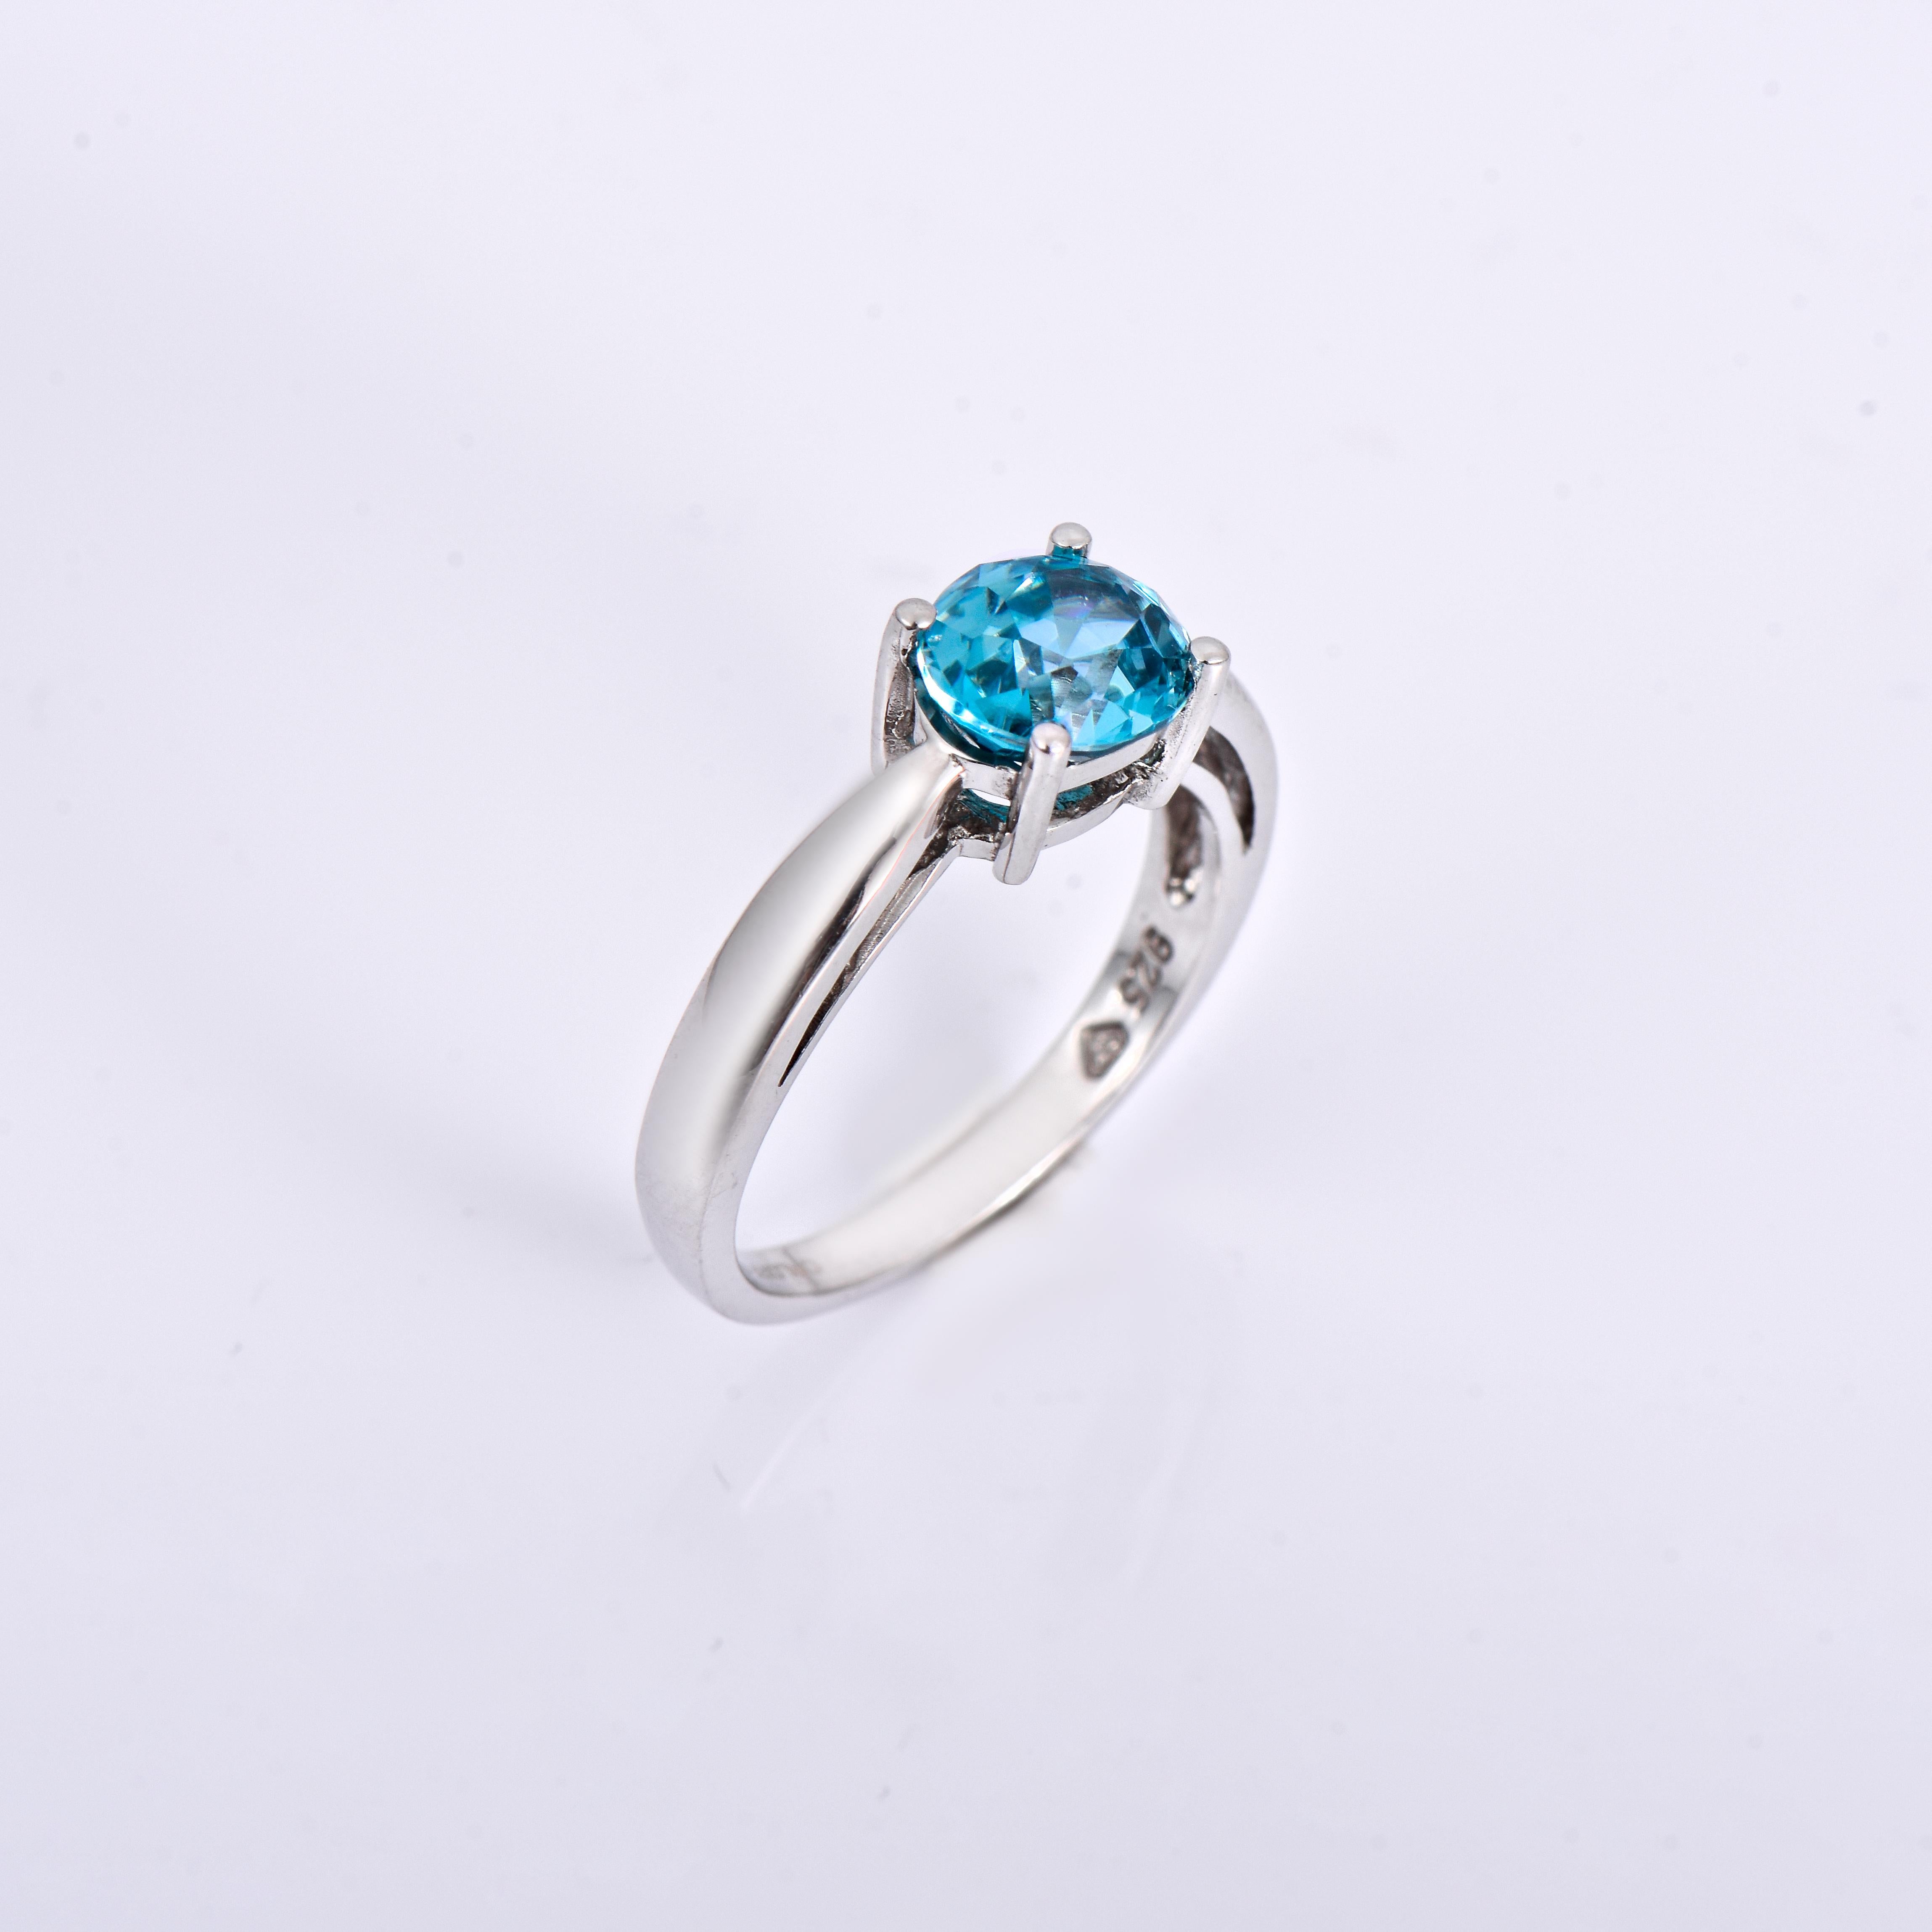 Orloff of Denmark; 925 Sterling Silver Ring set with a 3 carat Natural Cambodian Blue Zircon.

This piece has been meticulously hand-crafted out of 925 sterling silver.
In the center, set with 4 prongs, is a stunning 3 carat blue zircon mined,